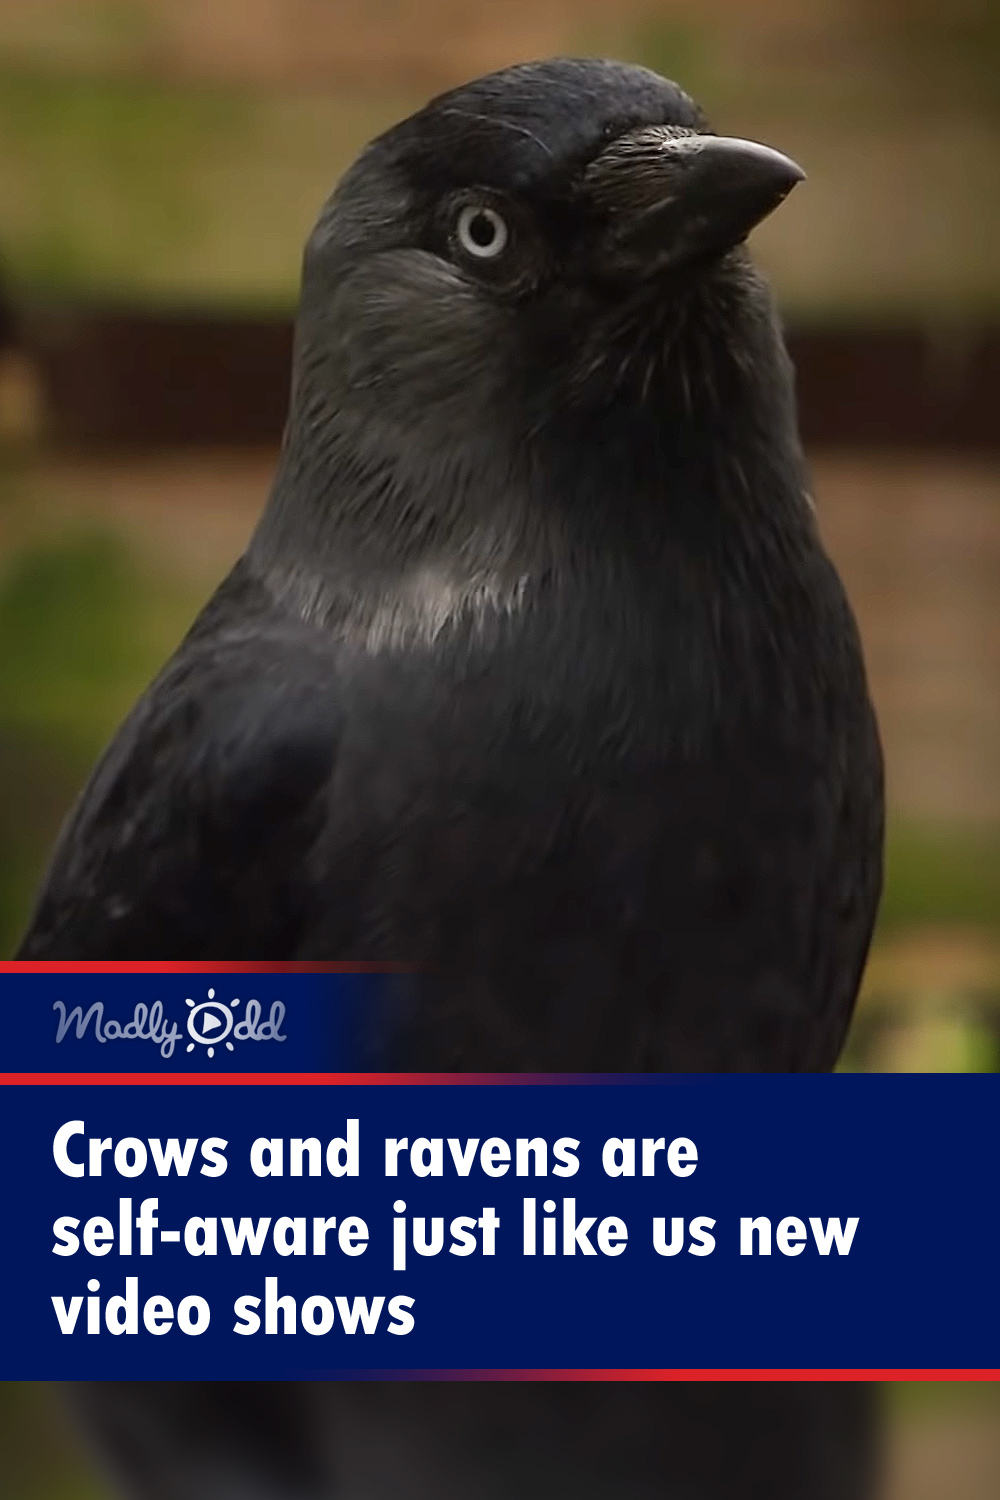 Crows and ravens are self-aware just like us new video shows